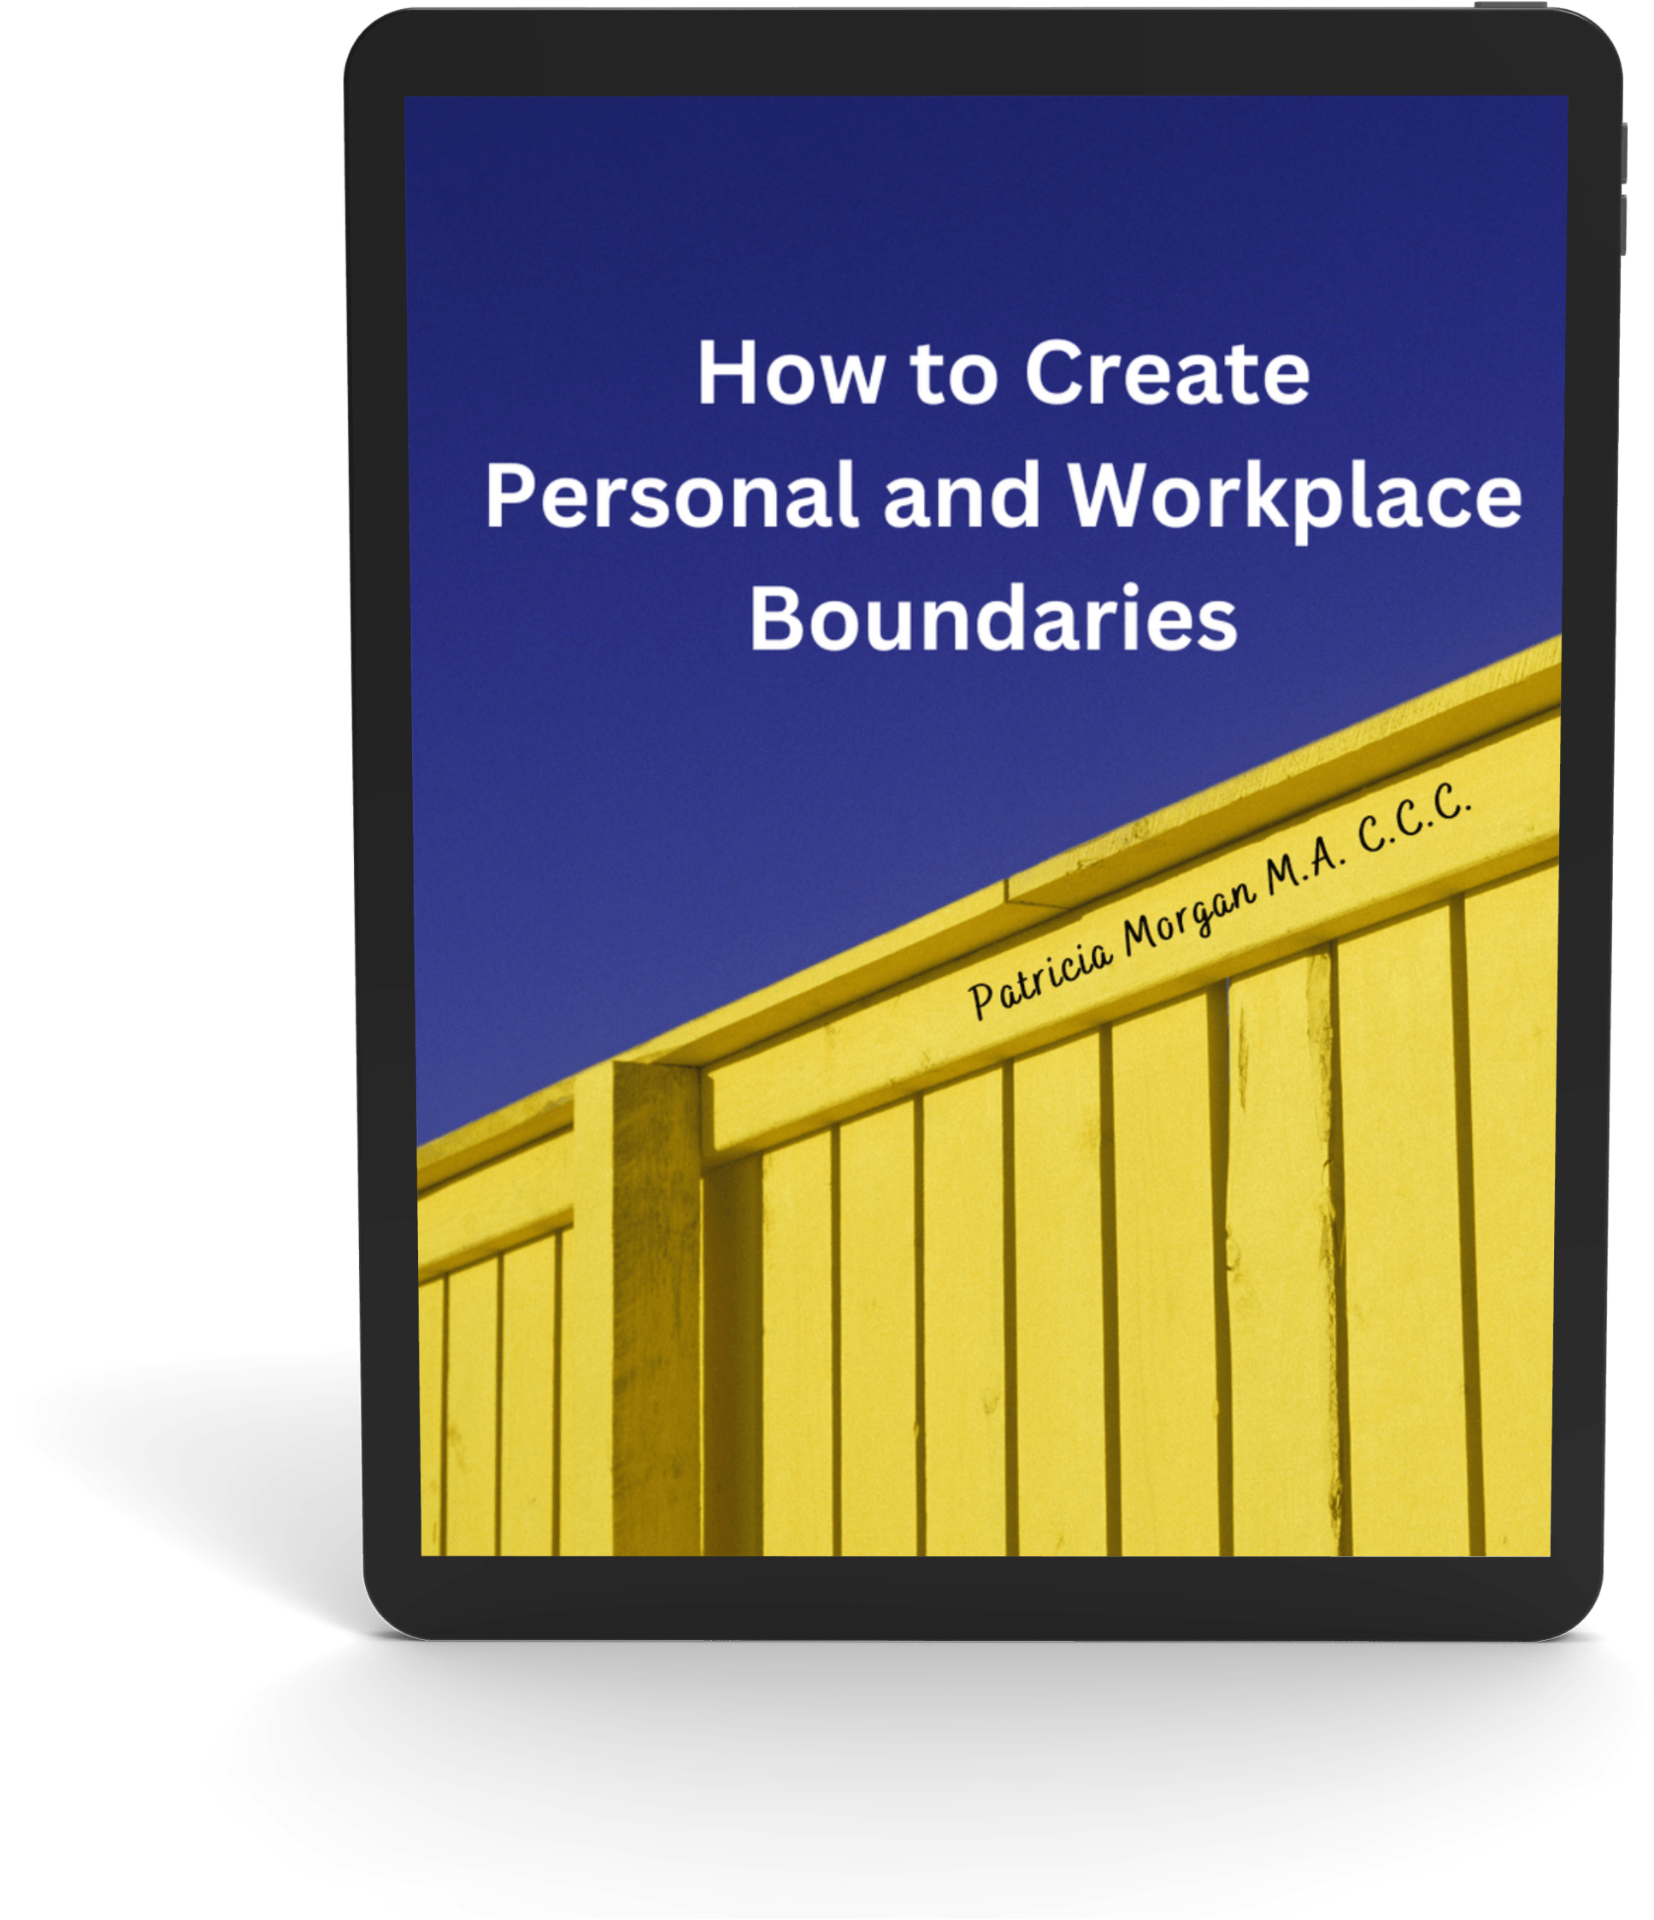 How to Create Personal and Workplace Boundaries